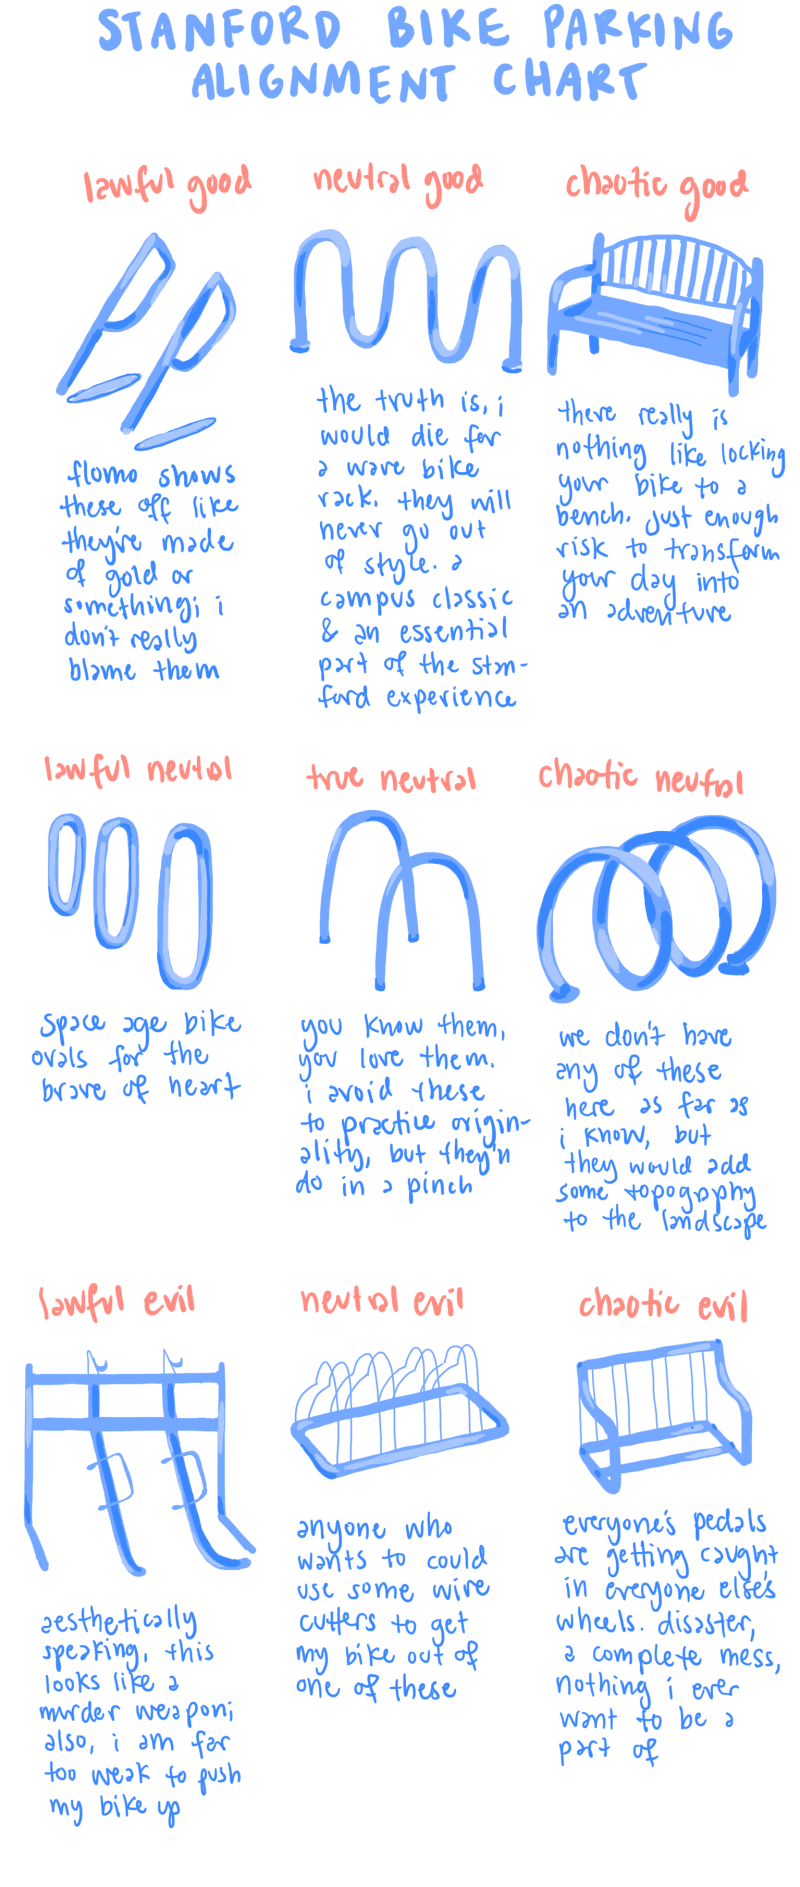 Alignment chart displaying different types of bike racks